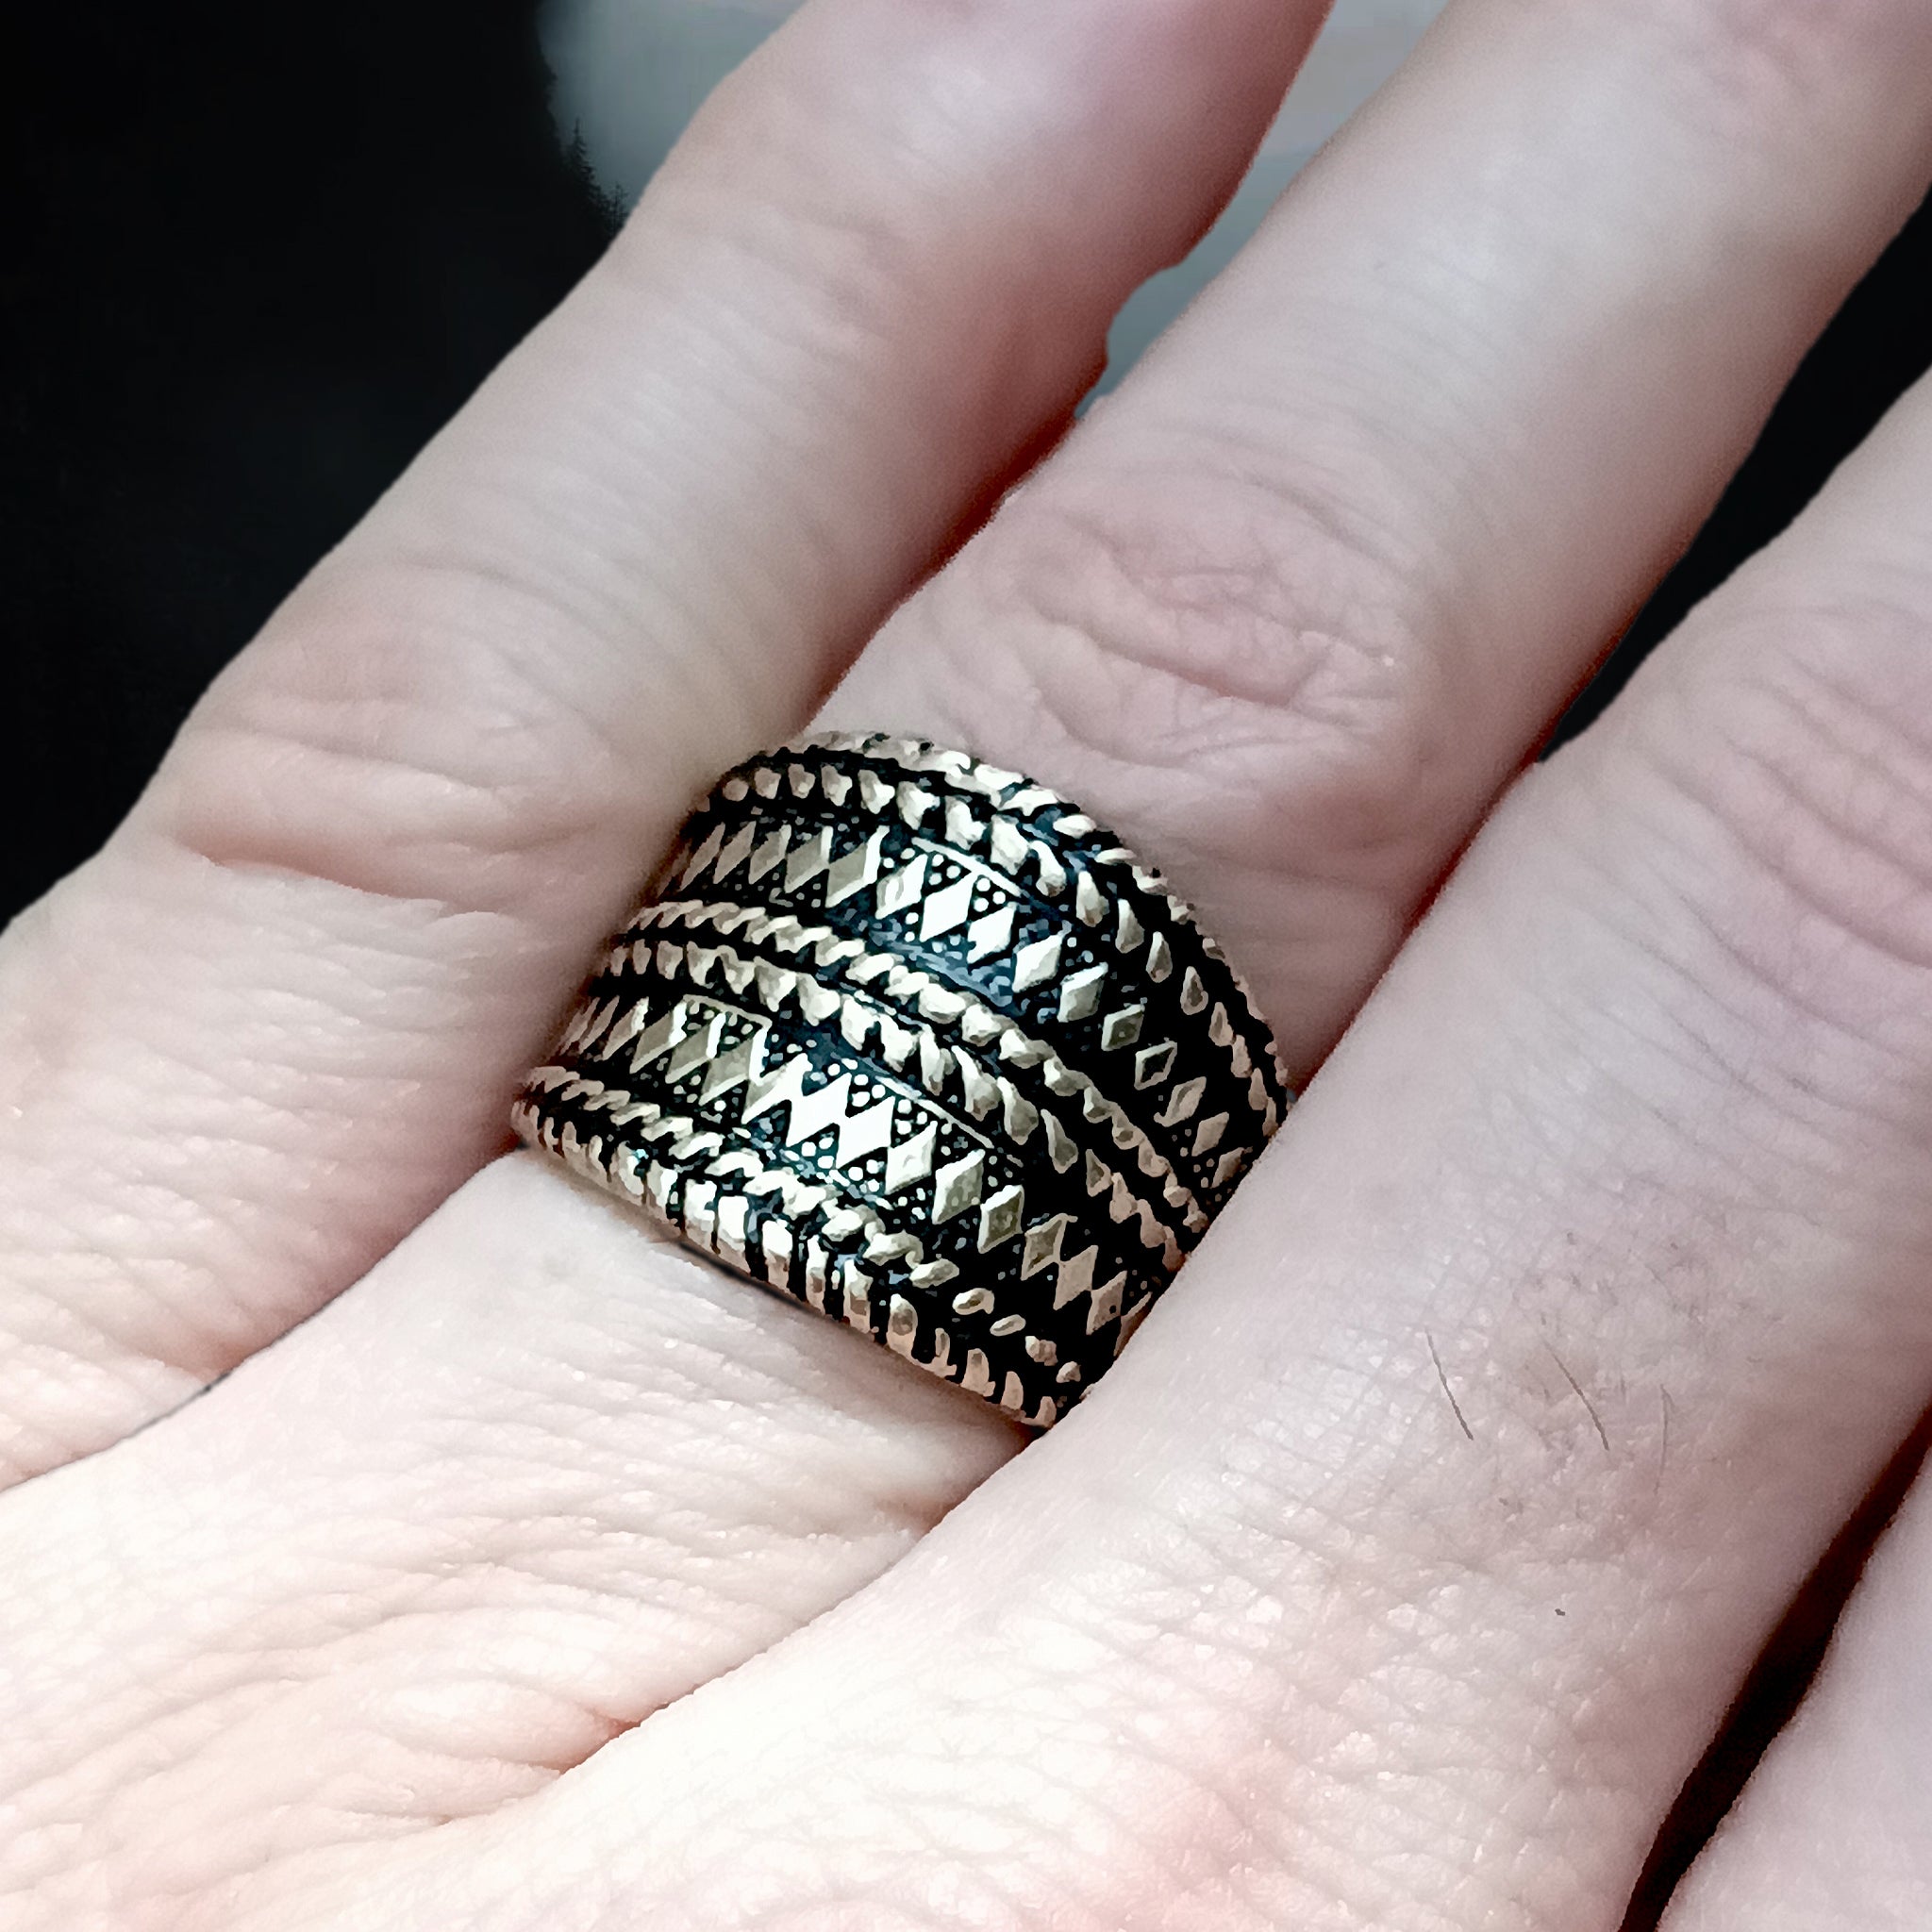 Bronze Replica Ring with Decorated Viking Design on Finger